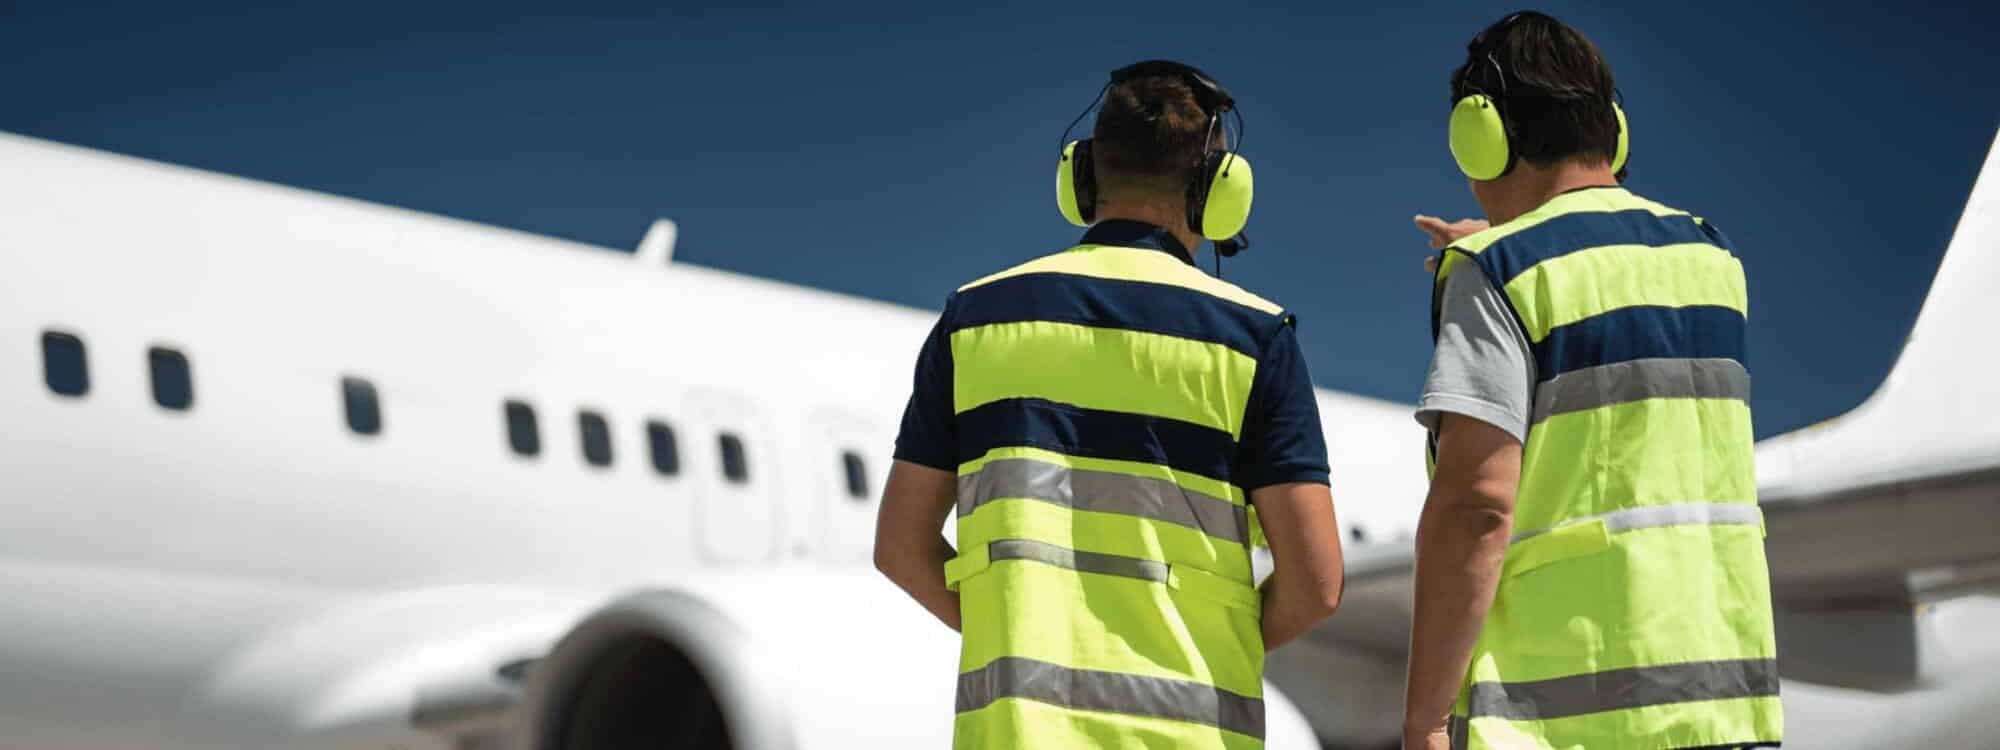 Aviation Safety Management Systems Courses in Australia, New Zealand and Asia Pacific